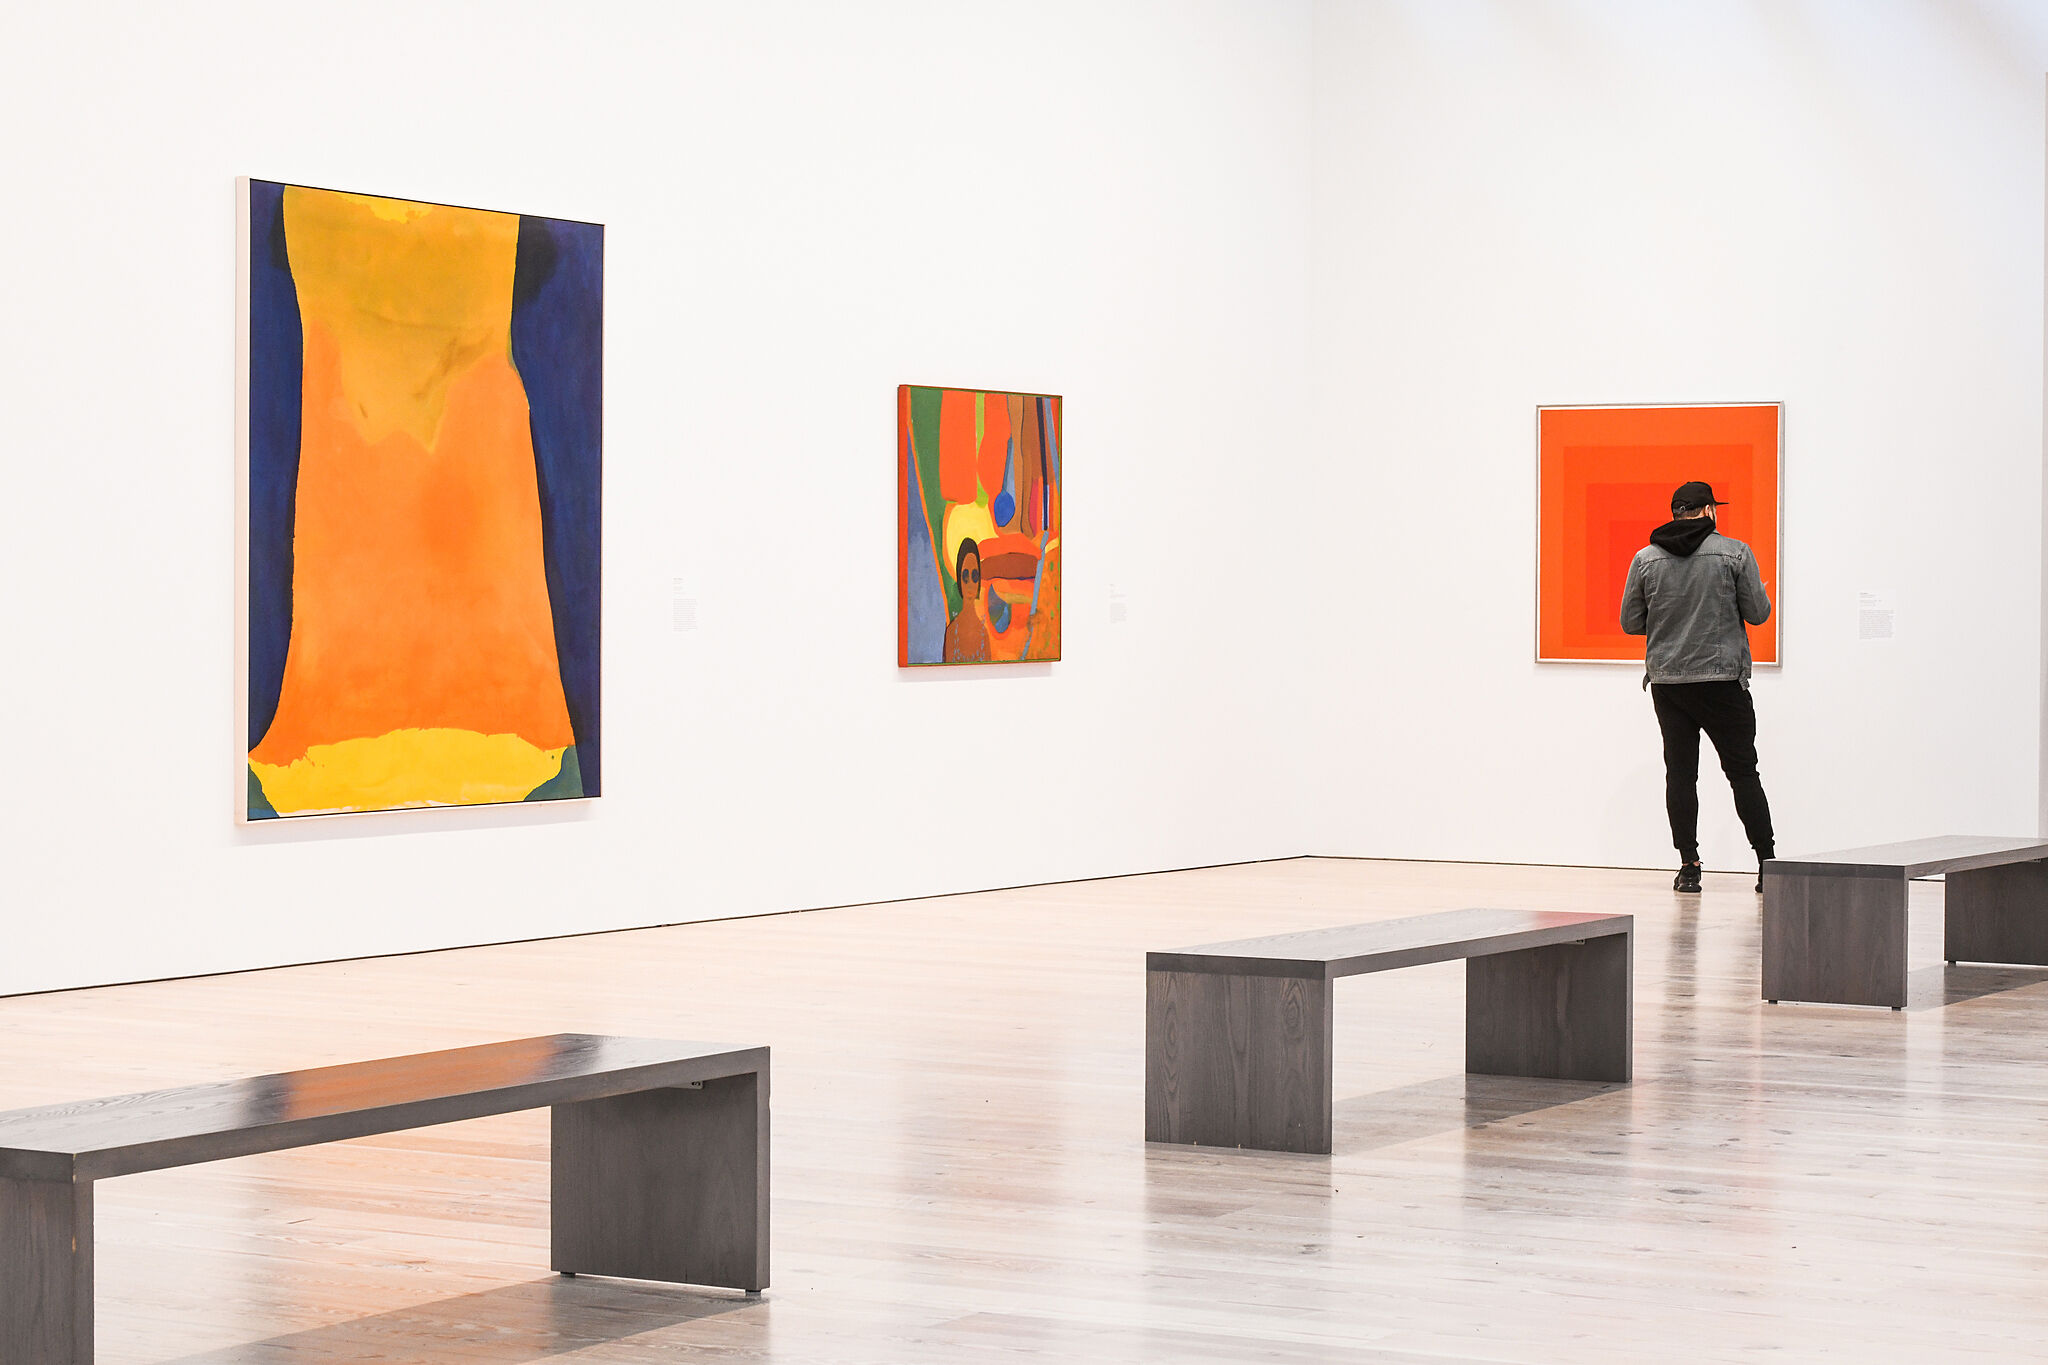 An installation view of artworks in a gallery.